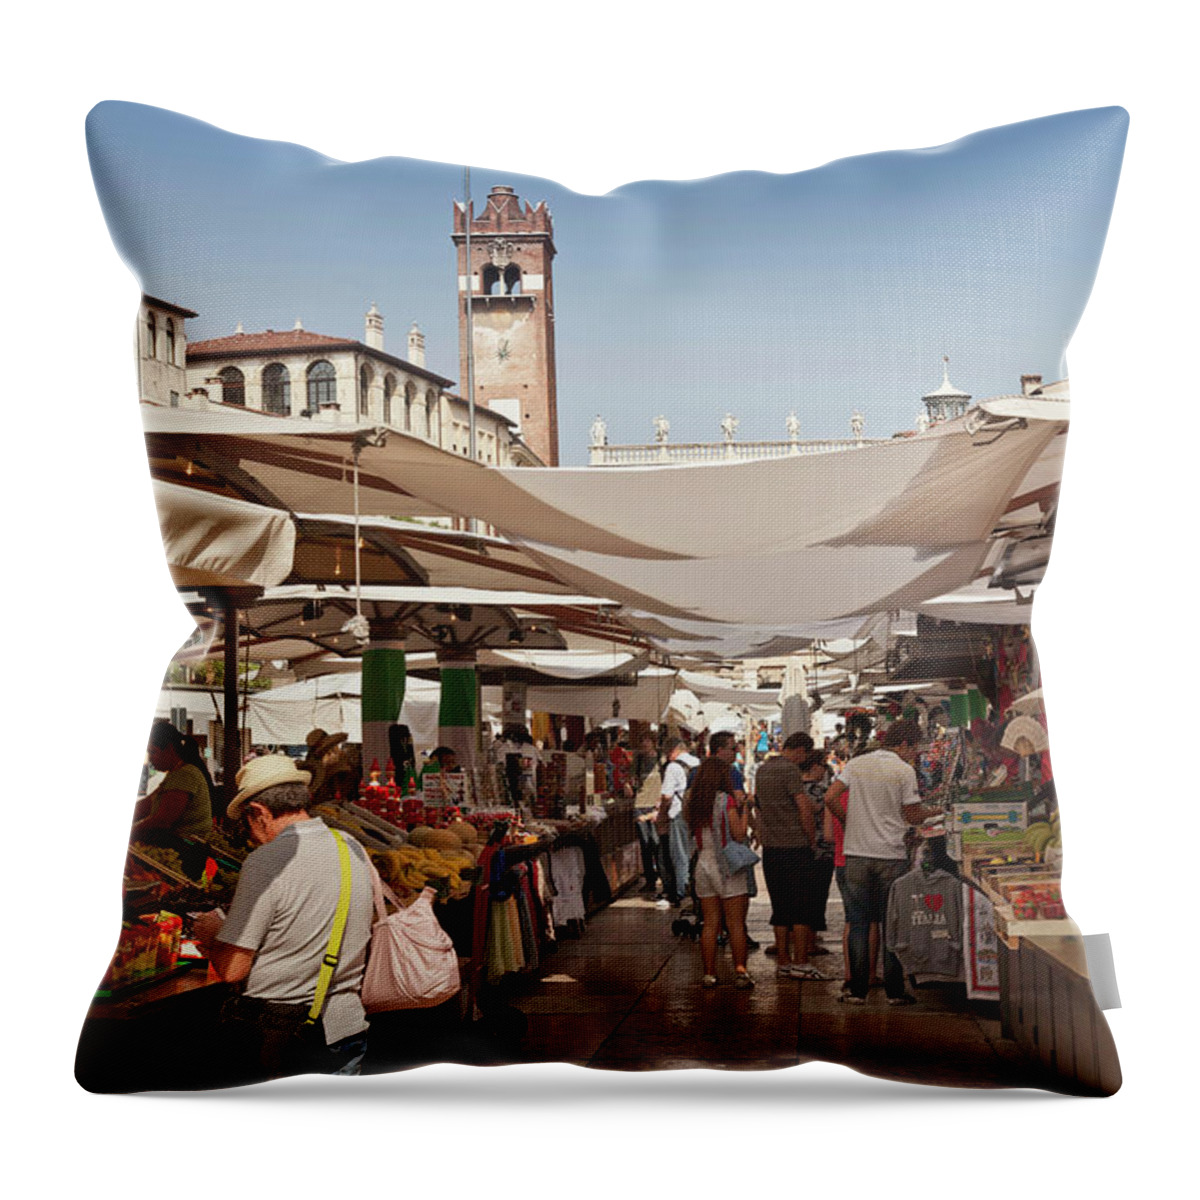 Tranquility Throw Pillow featuring the photograph Vendors At Market In Town Square #1 by Cultura Rm Exclusive/walter Zerla